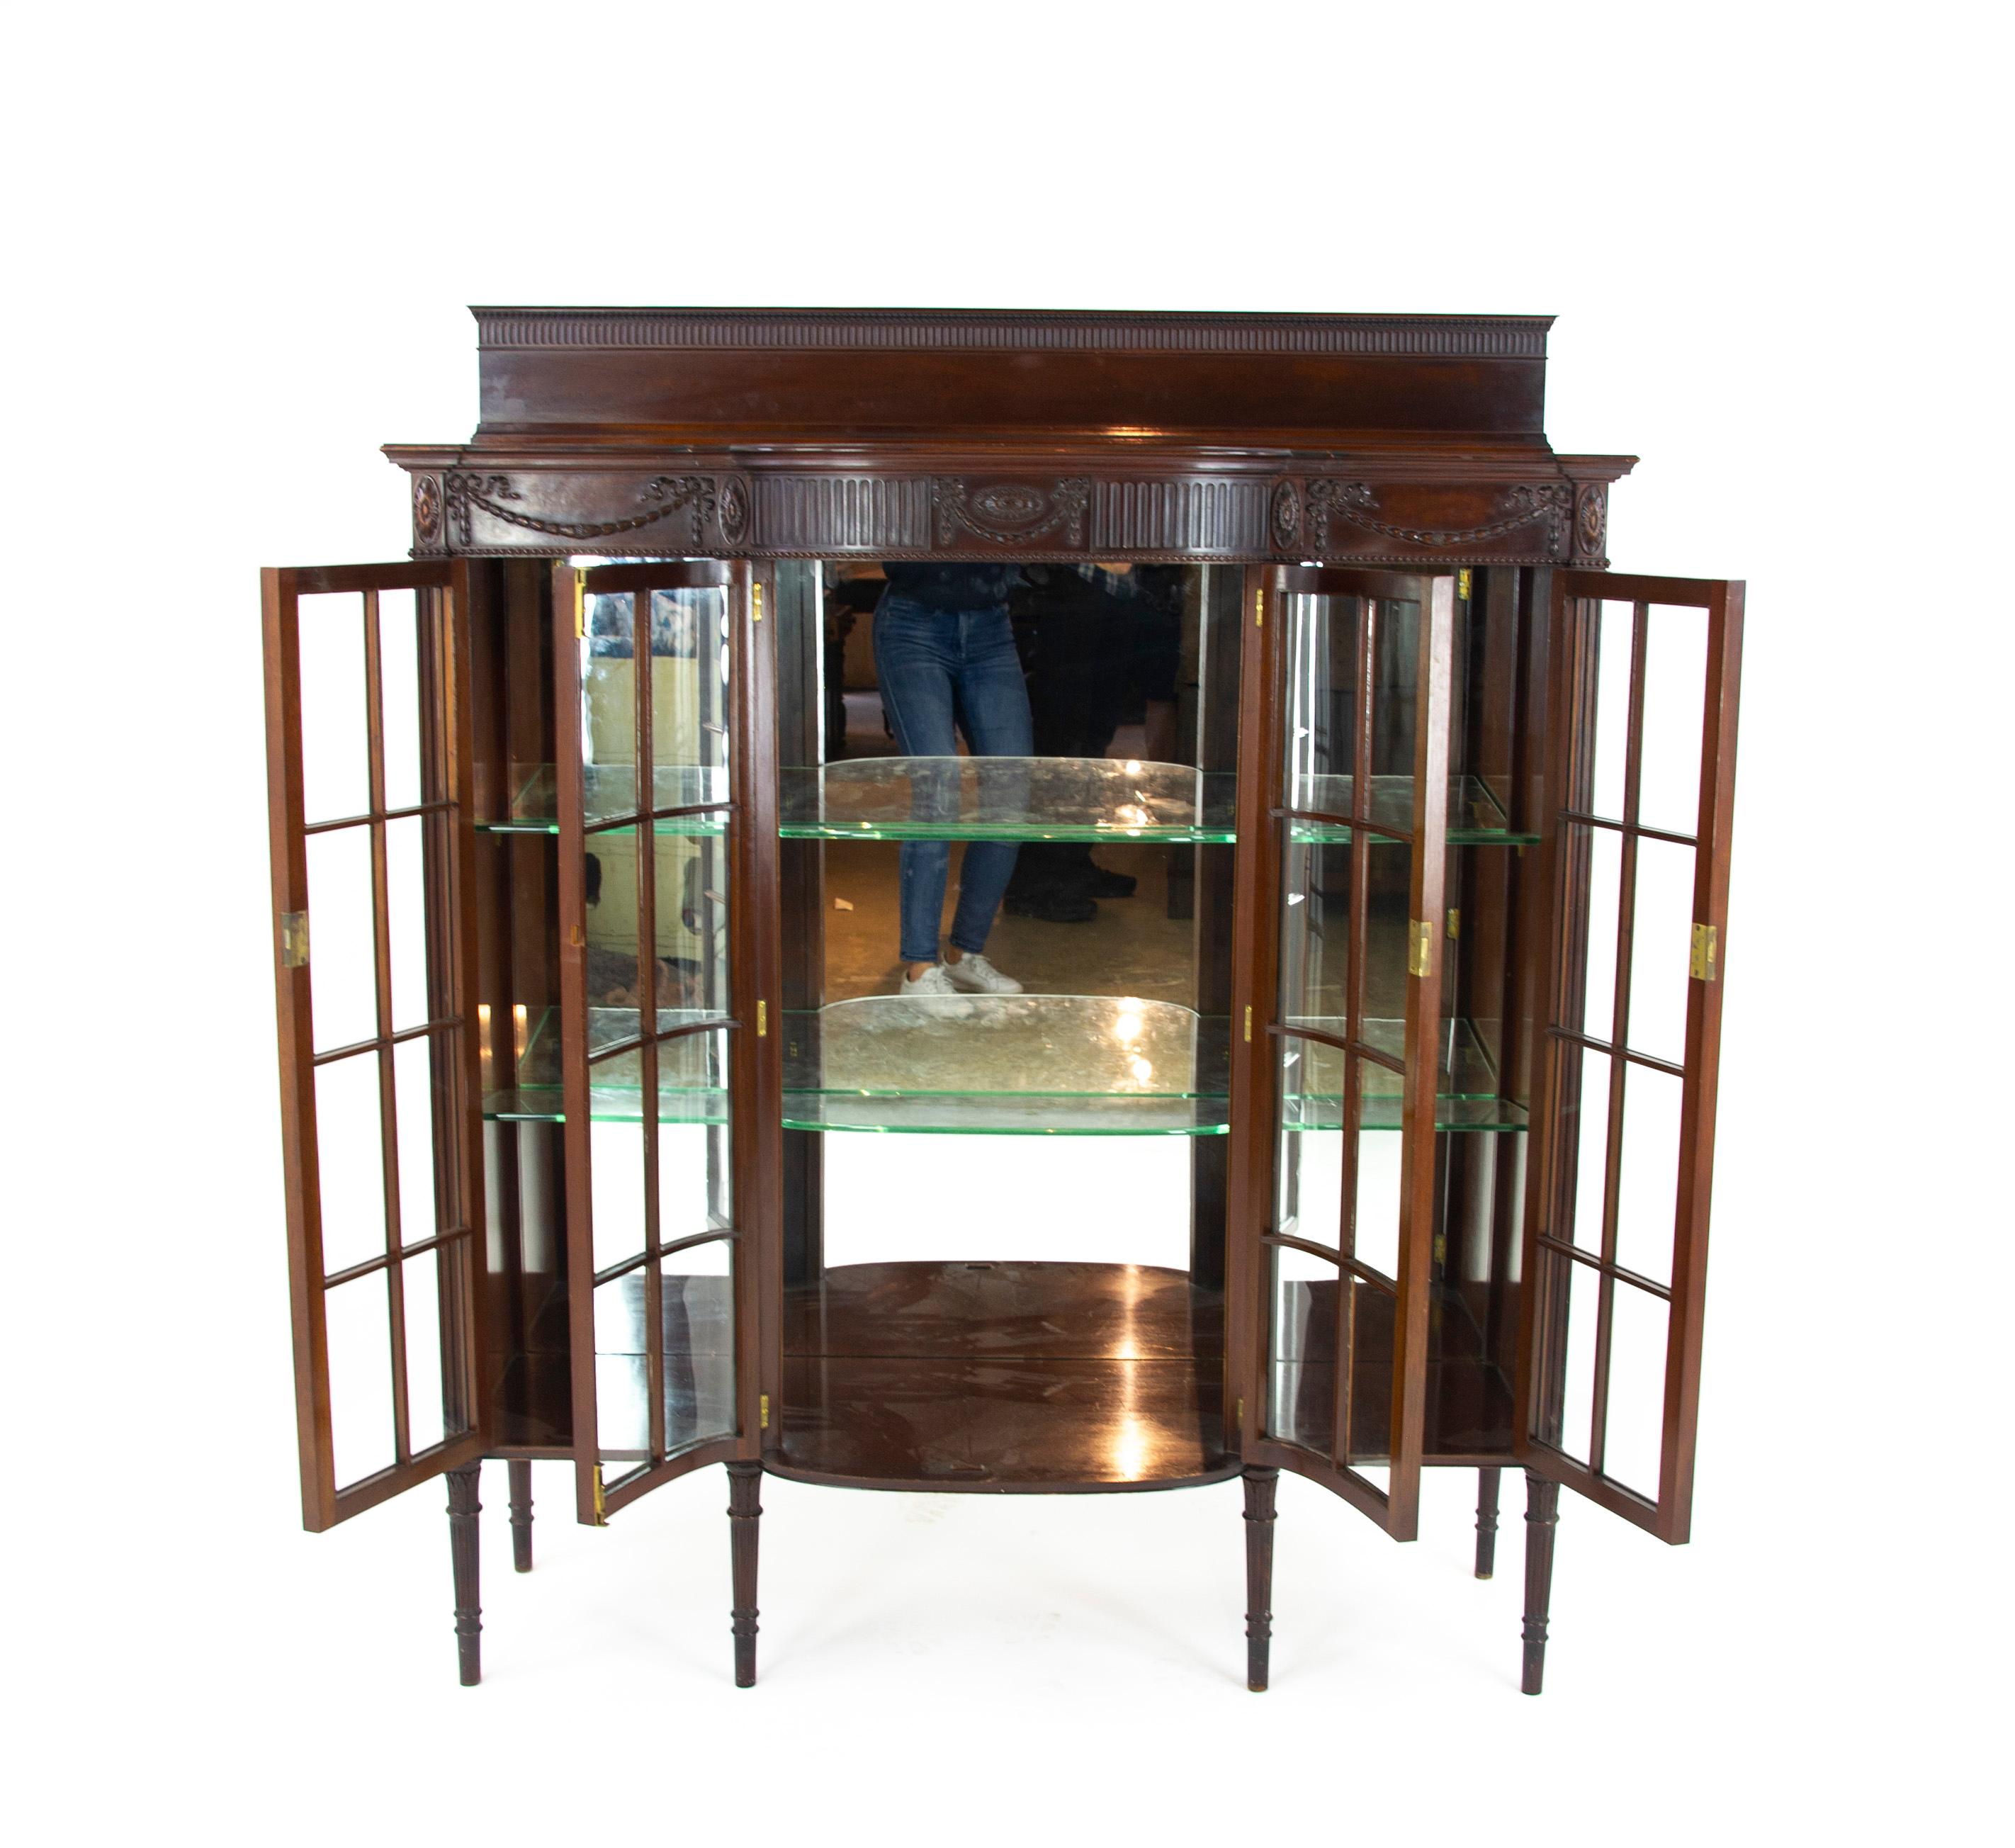 Antique walnut cabinet, breakfront display cabinet, china cabinet with mirror back, Scotland 1920, antique furniture, B1513

Scotland 1920
Solid walnut
Original finish
Detailed pediment top
Breakfront top
Swag ornamentation below
Pair of bow